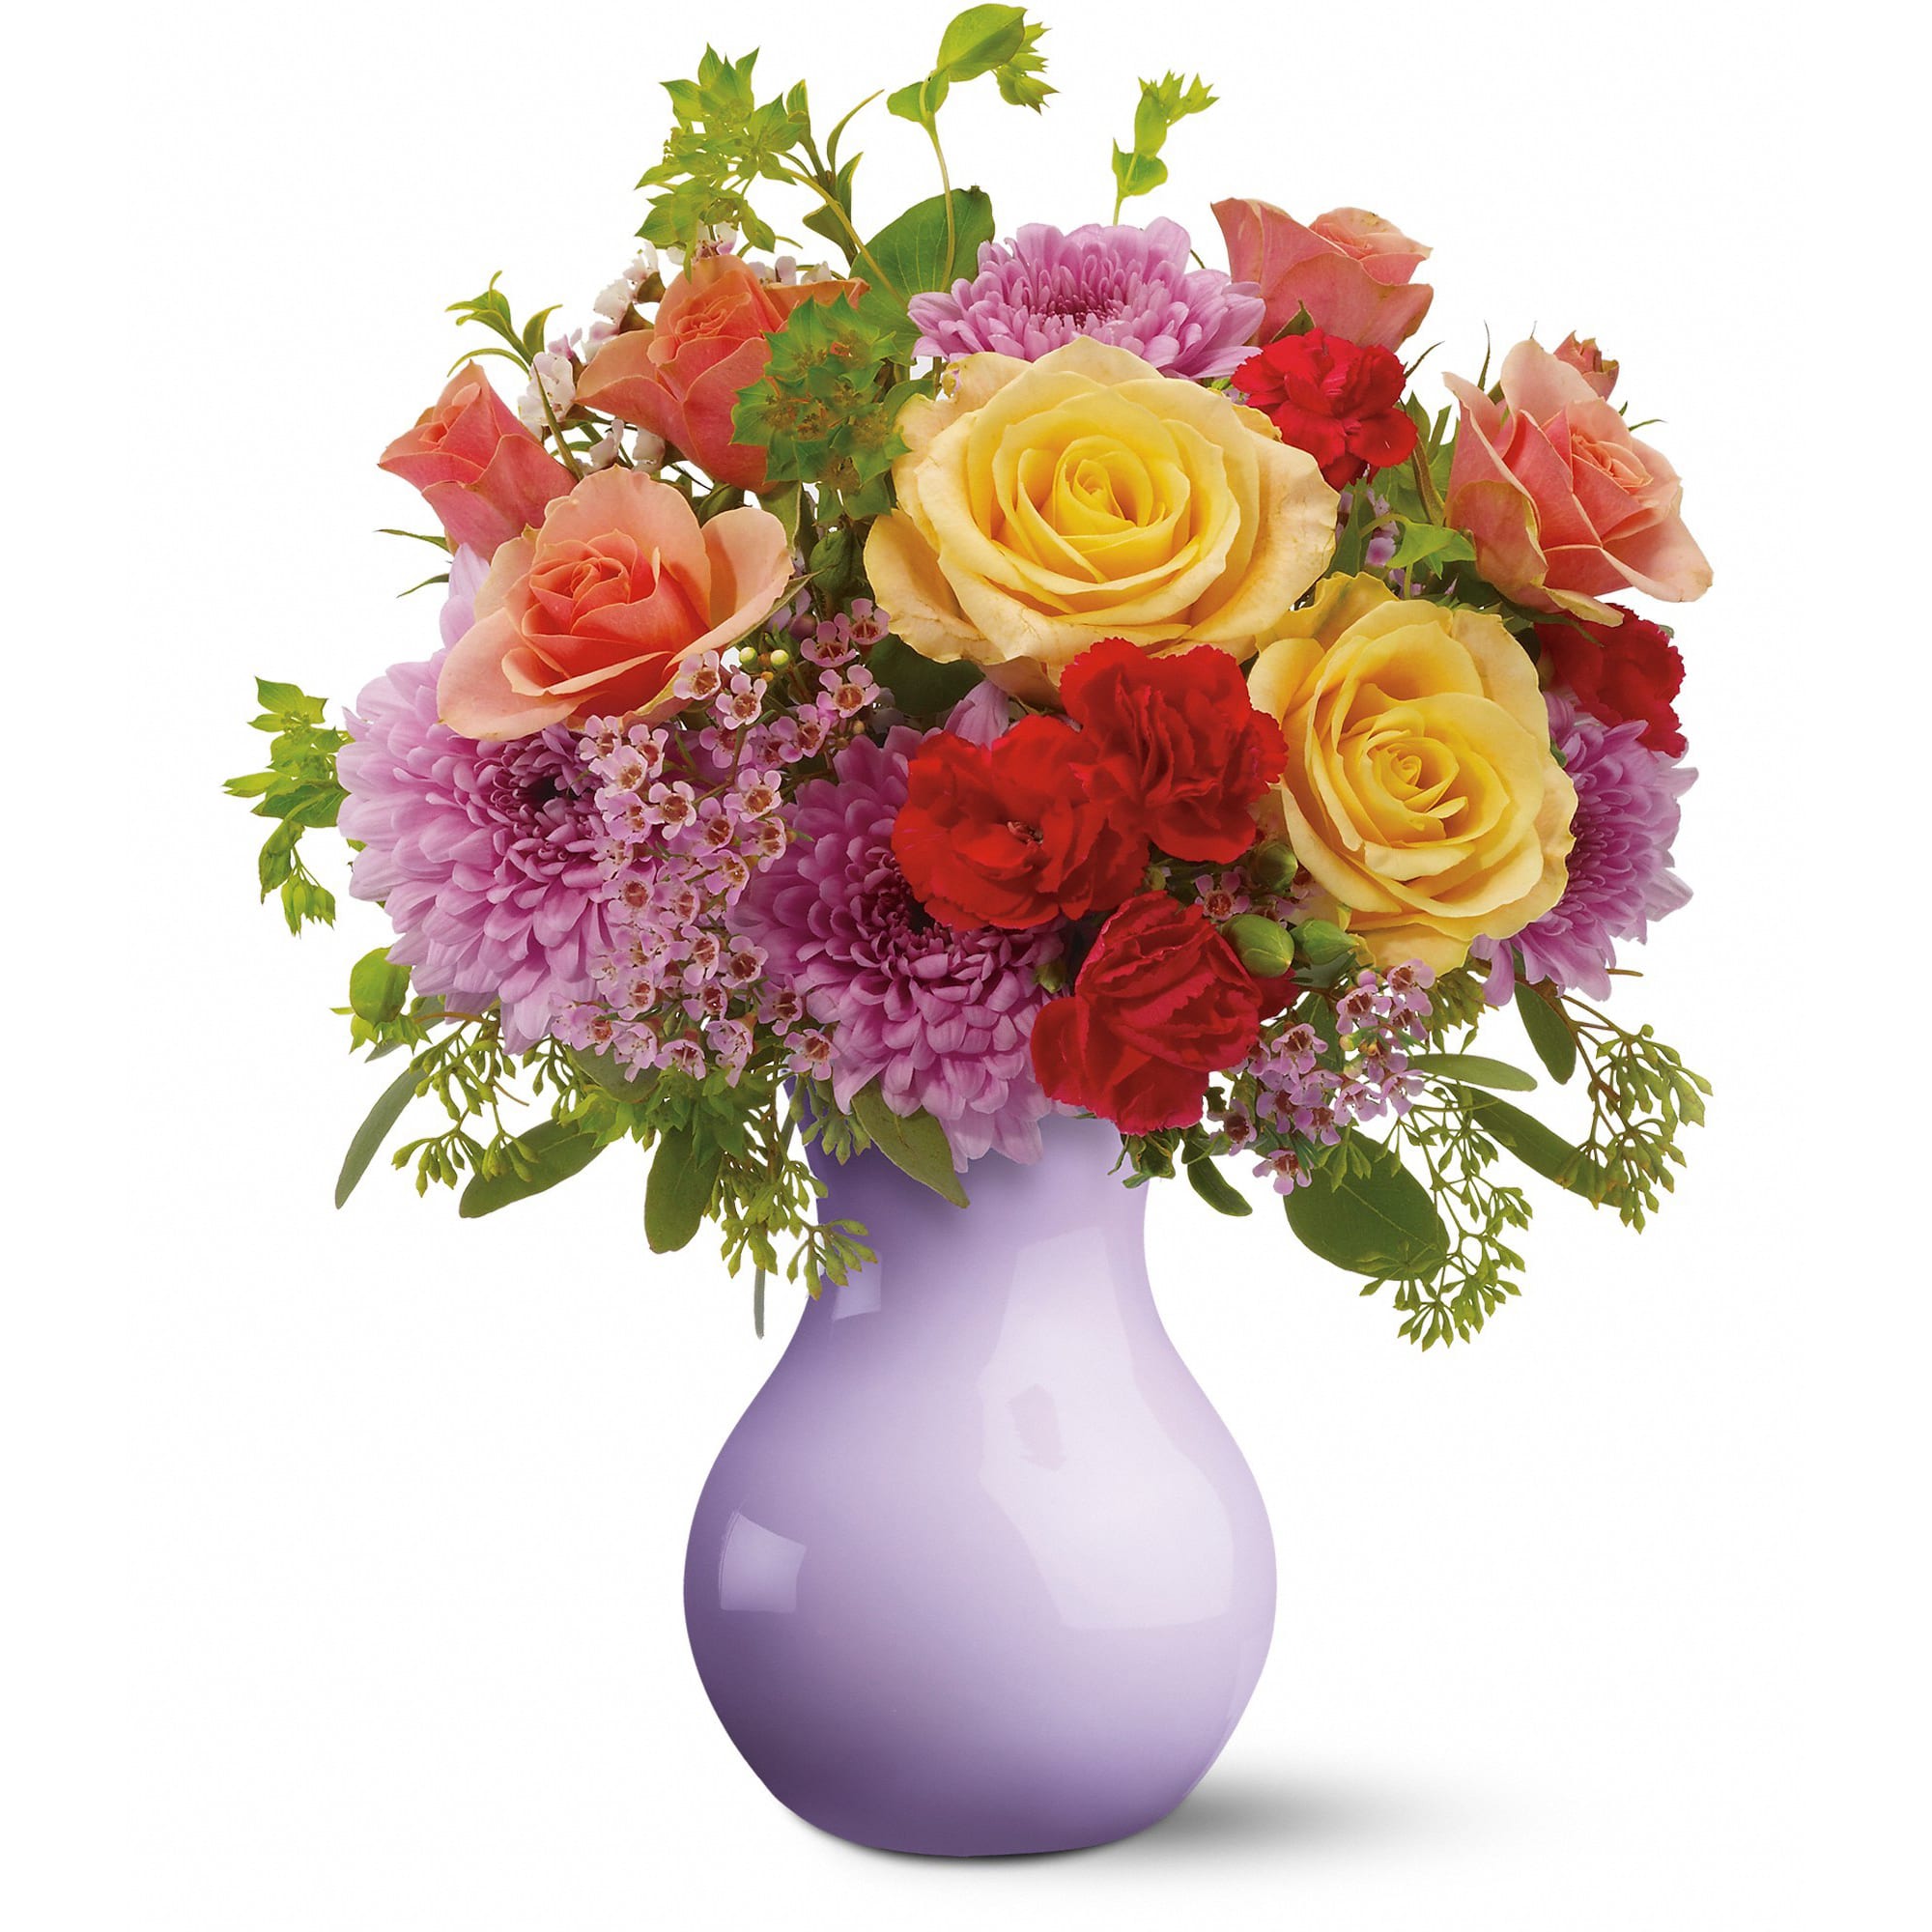 Teleflora's Stratford Gardens - For a gift that's reminiscent of a stroll through the English countryside, send this stunning mix of pink and peach roses mingled with cool lavender chrysanthemums, arranged in a misty lavender vase. It's as charming as a cottage garden. 